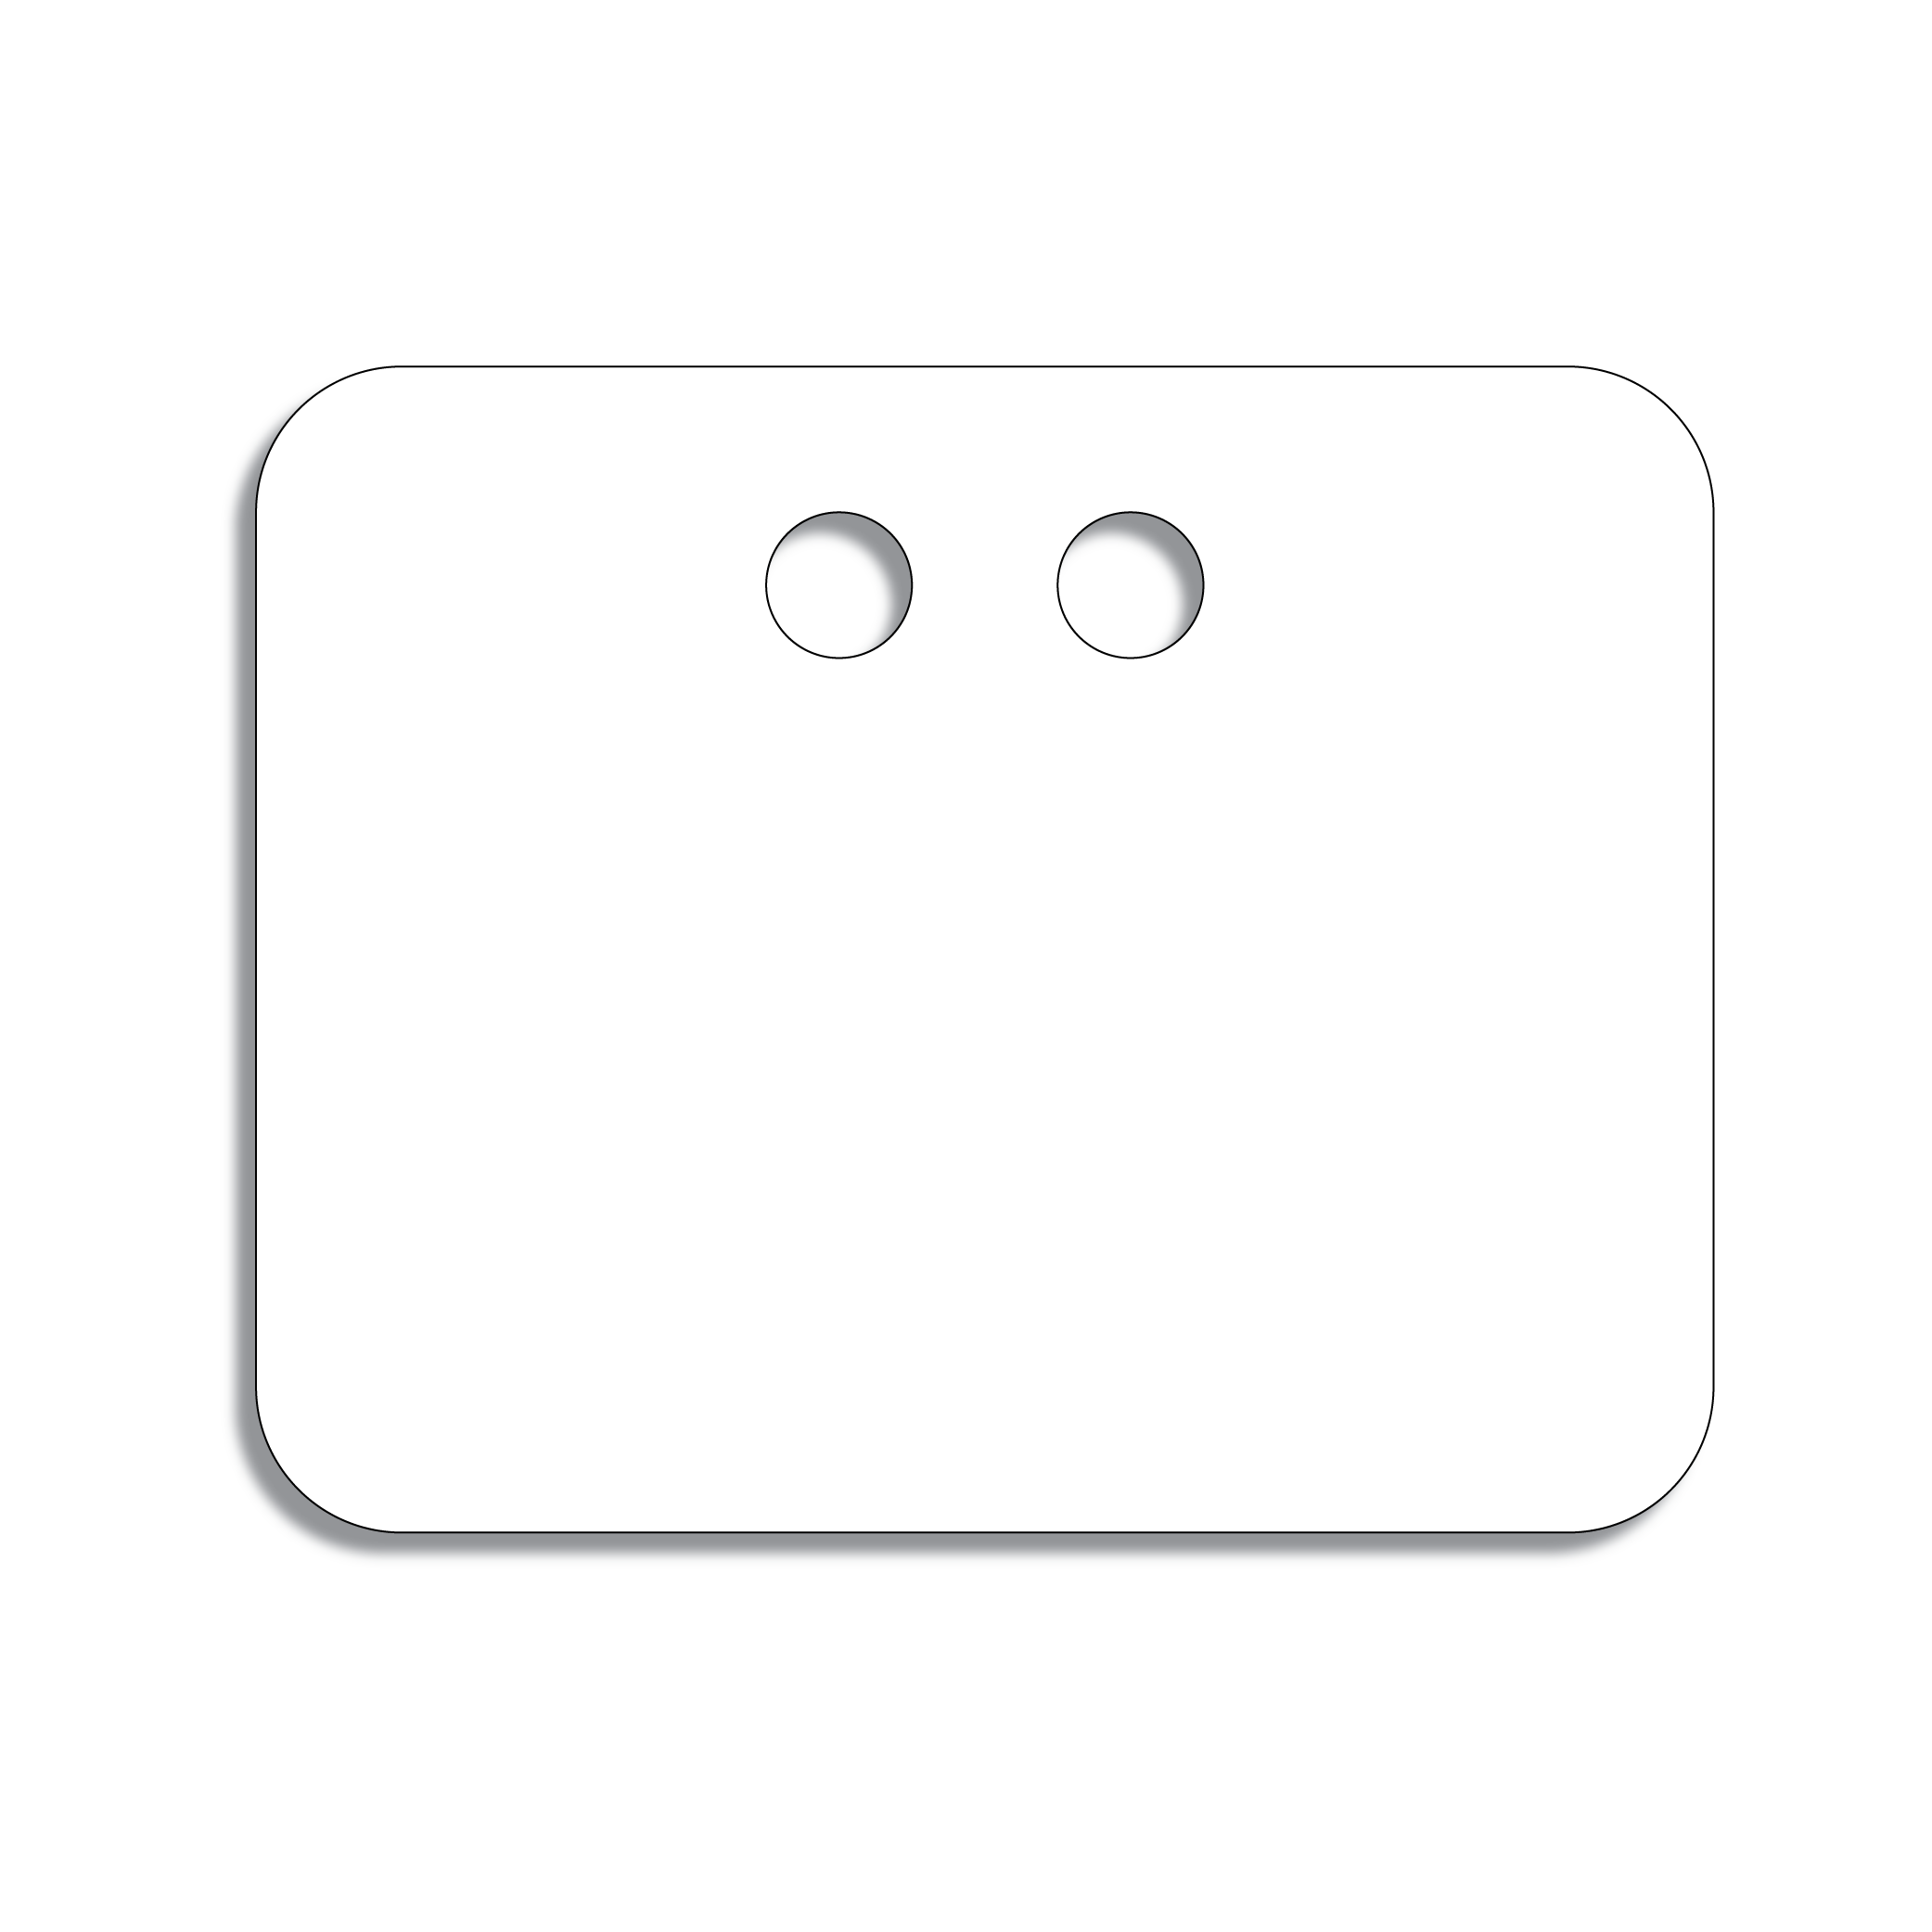 A rectangular, white plastic tag with rounded corners and two holes at center, top.